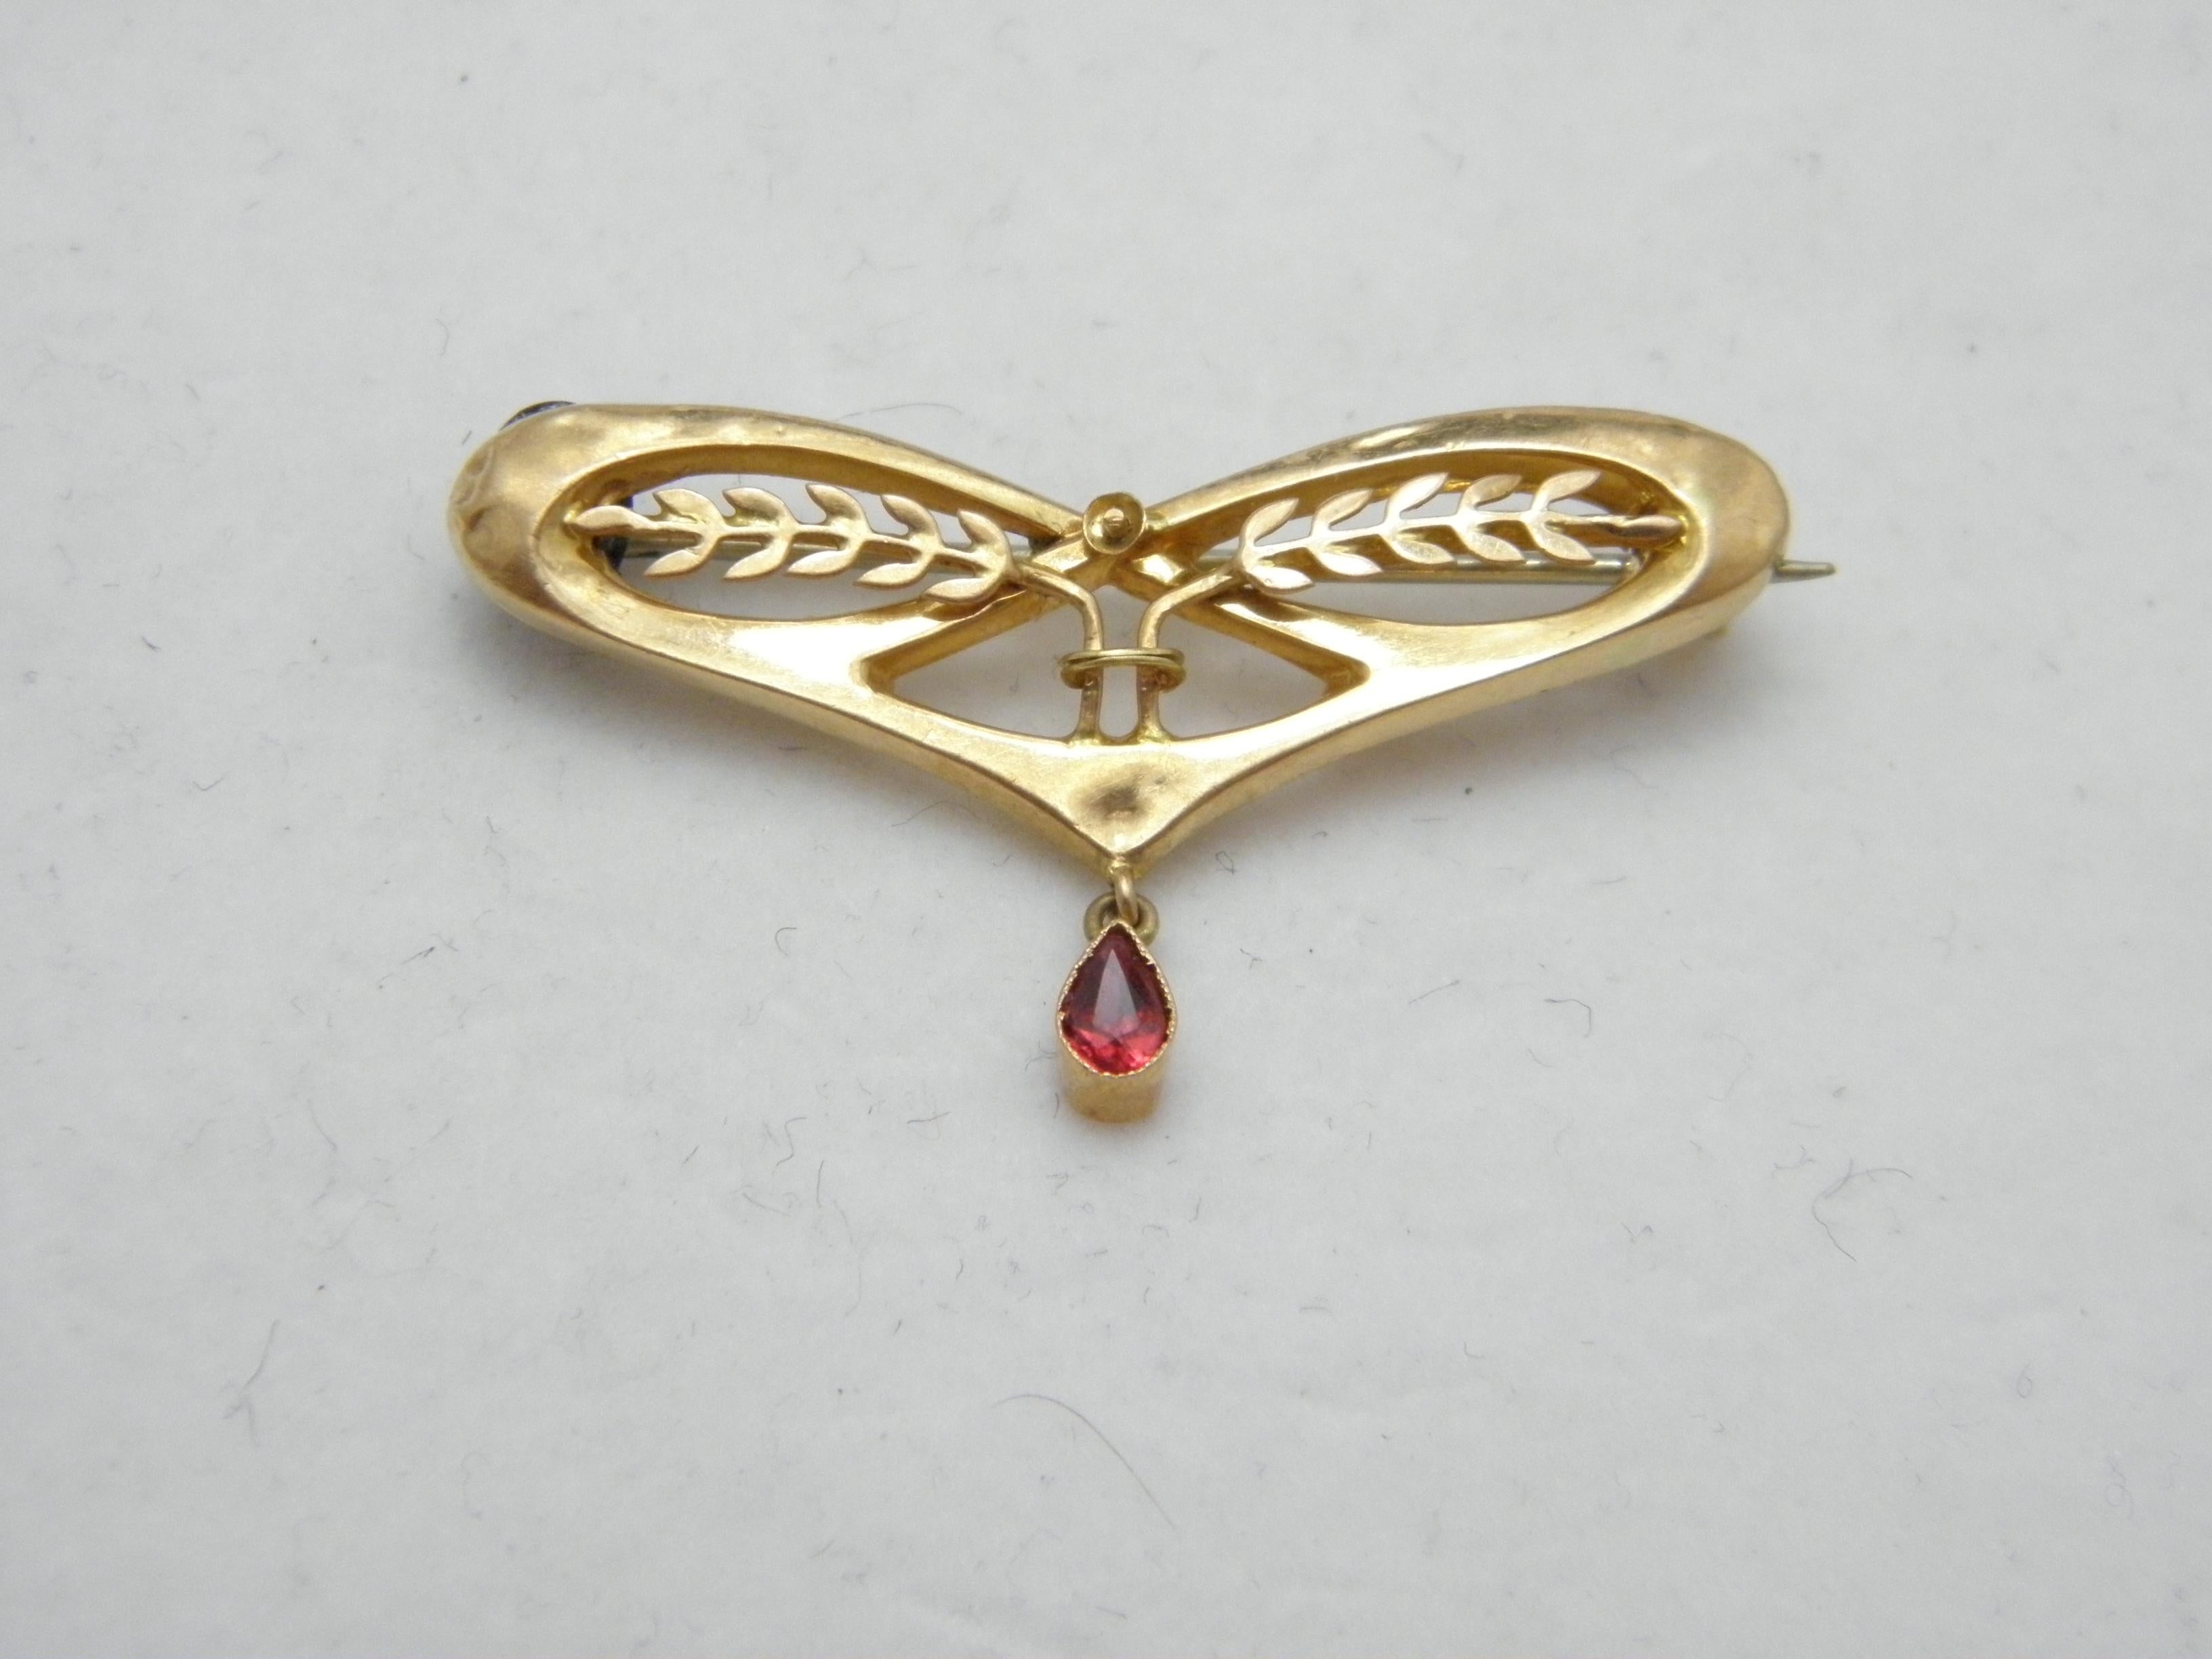 If you have landed on this page then you have an eye for beauty.

On offer is this stunning

18CT SOLID GOLD RUBY HARVEST FESTIVAL BROOCH

DETAILS
Material: 18ct (750/000) Solid Yellow Gold
Style: Harvest brooch with wheat detail and dangling